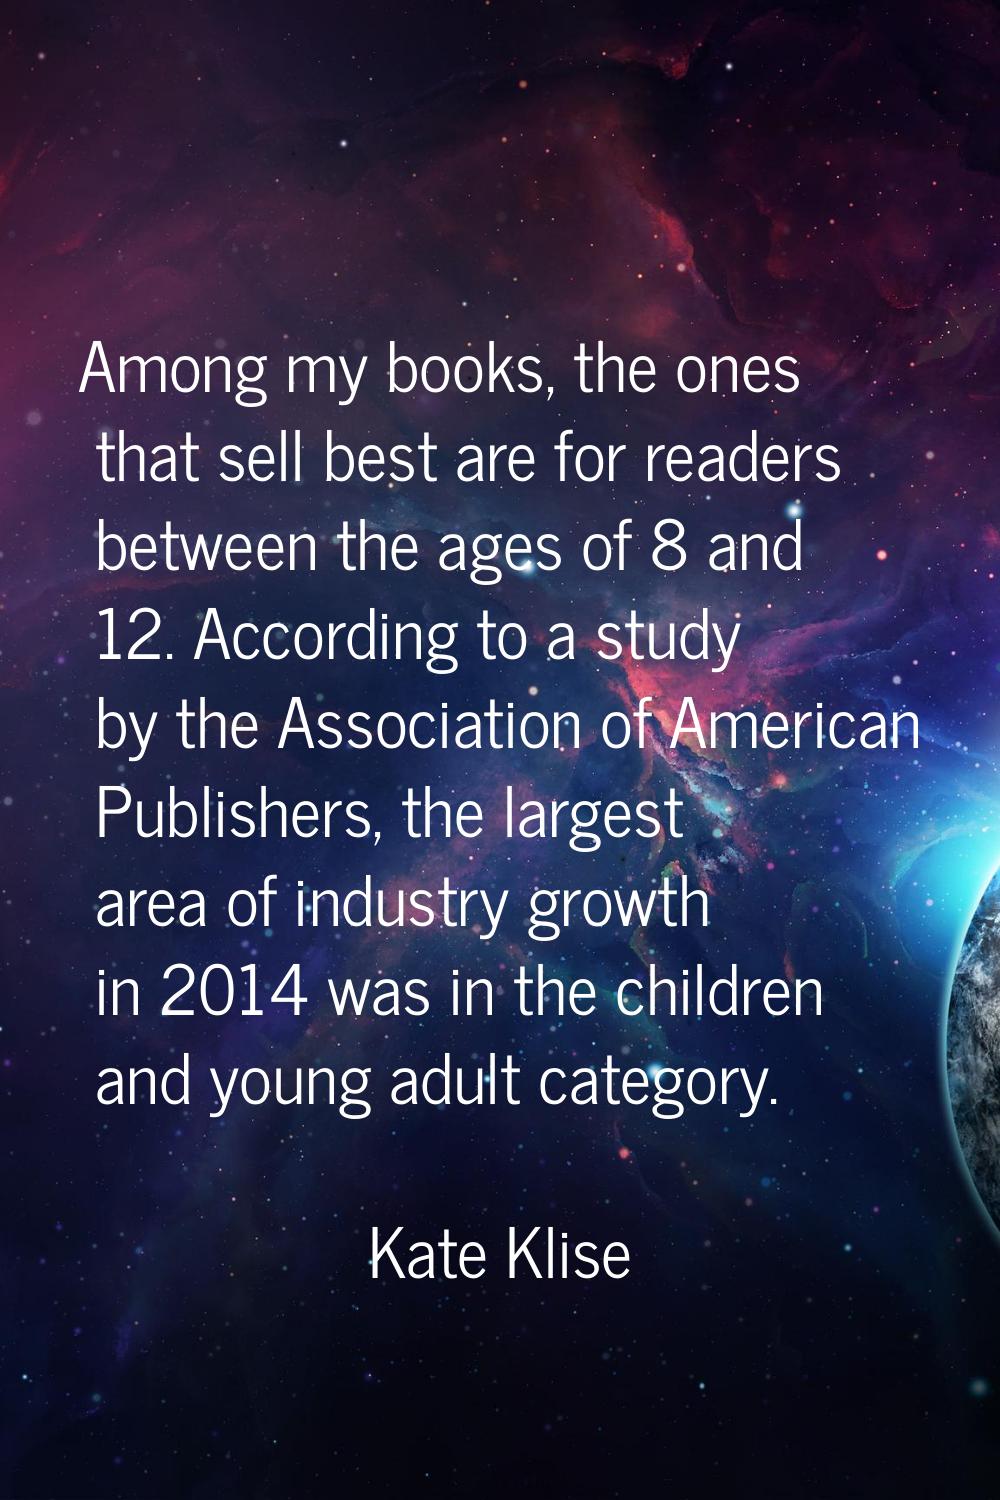 Among my books, the ones that sell best are for readers between the ages of 8 and 12. According to 